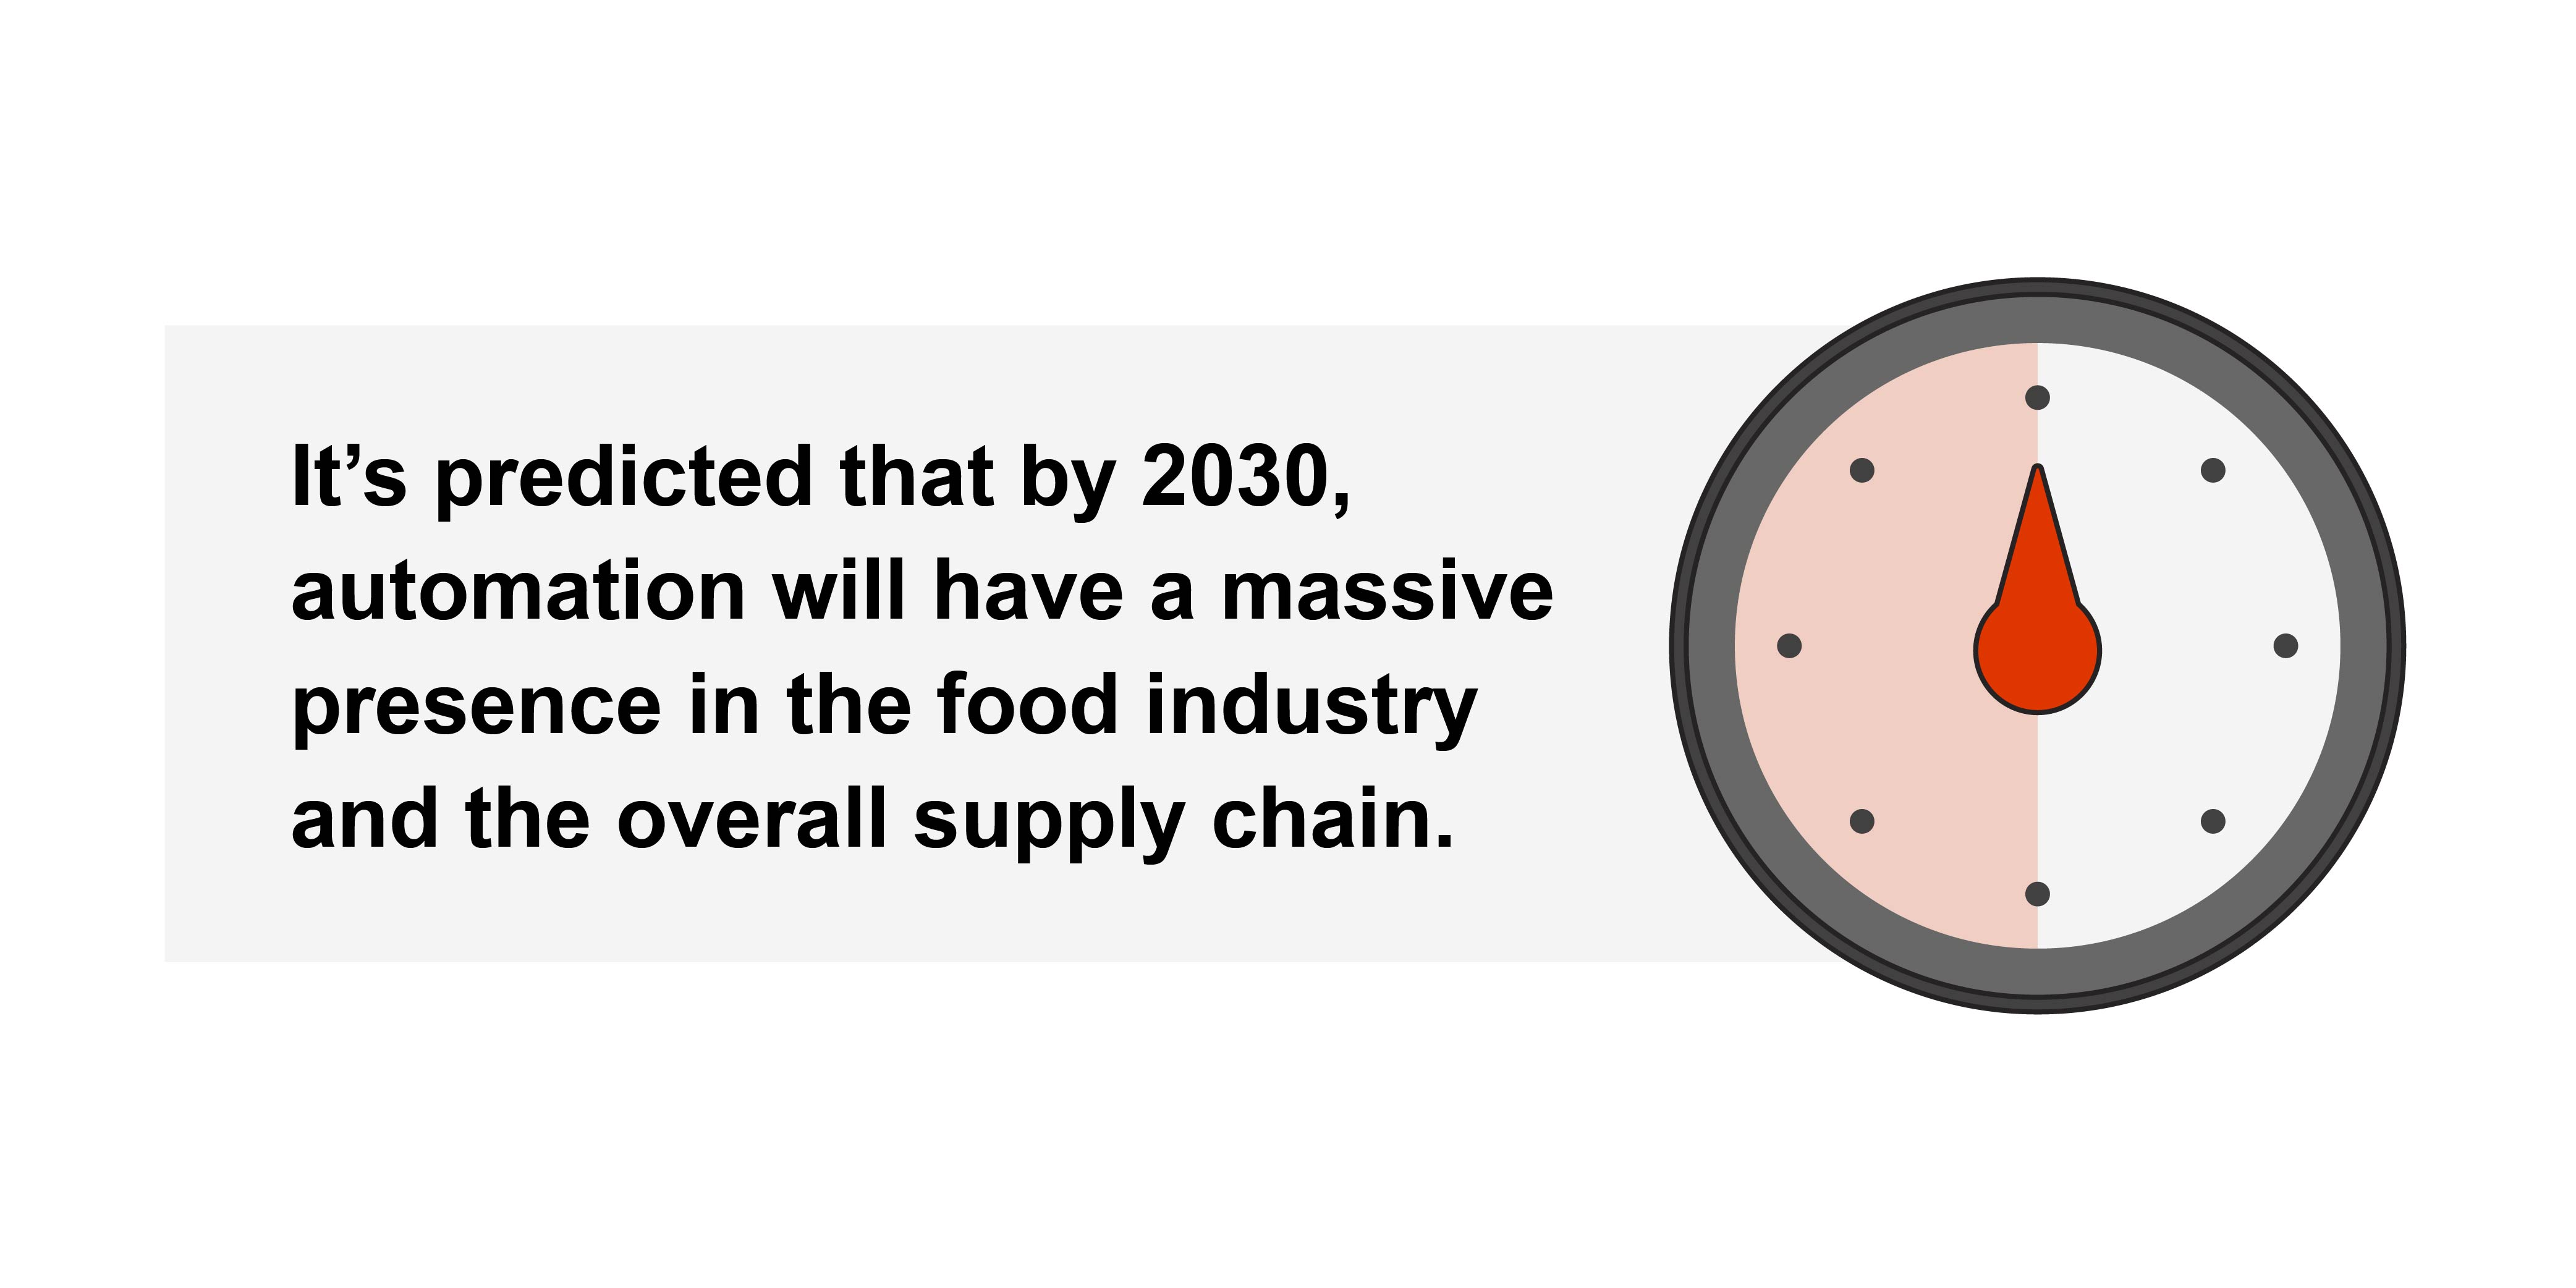 It's predicted that by 2030, automation will have a massive presence in the food industry.